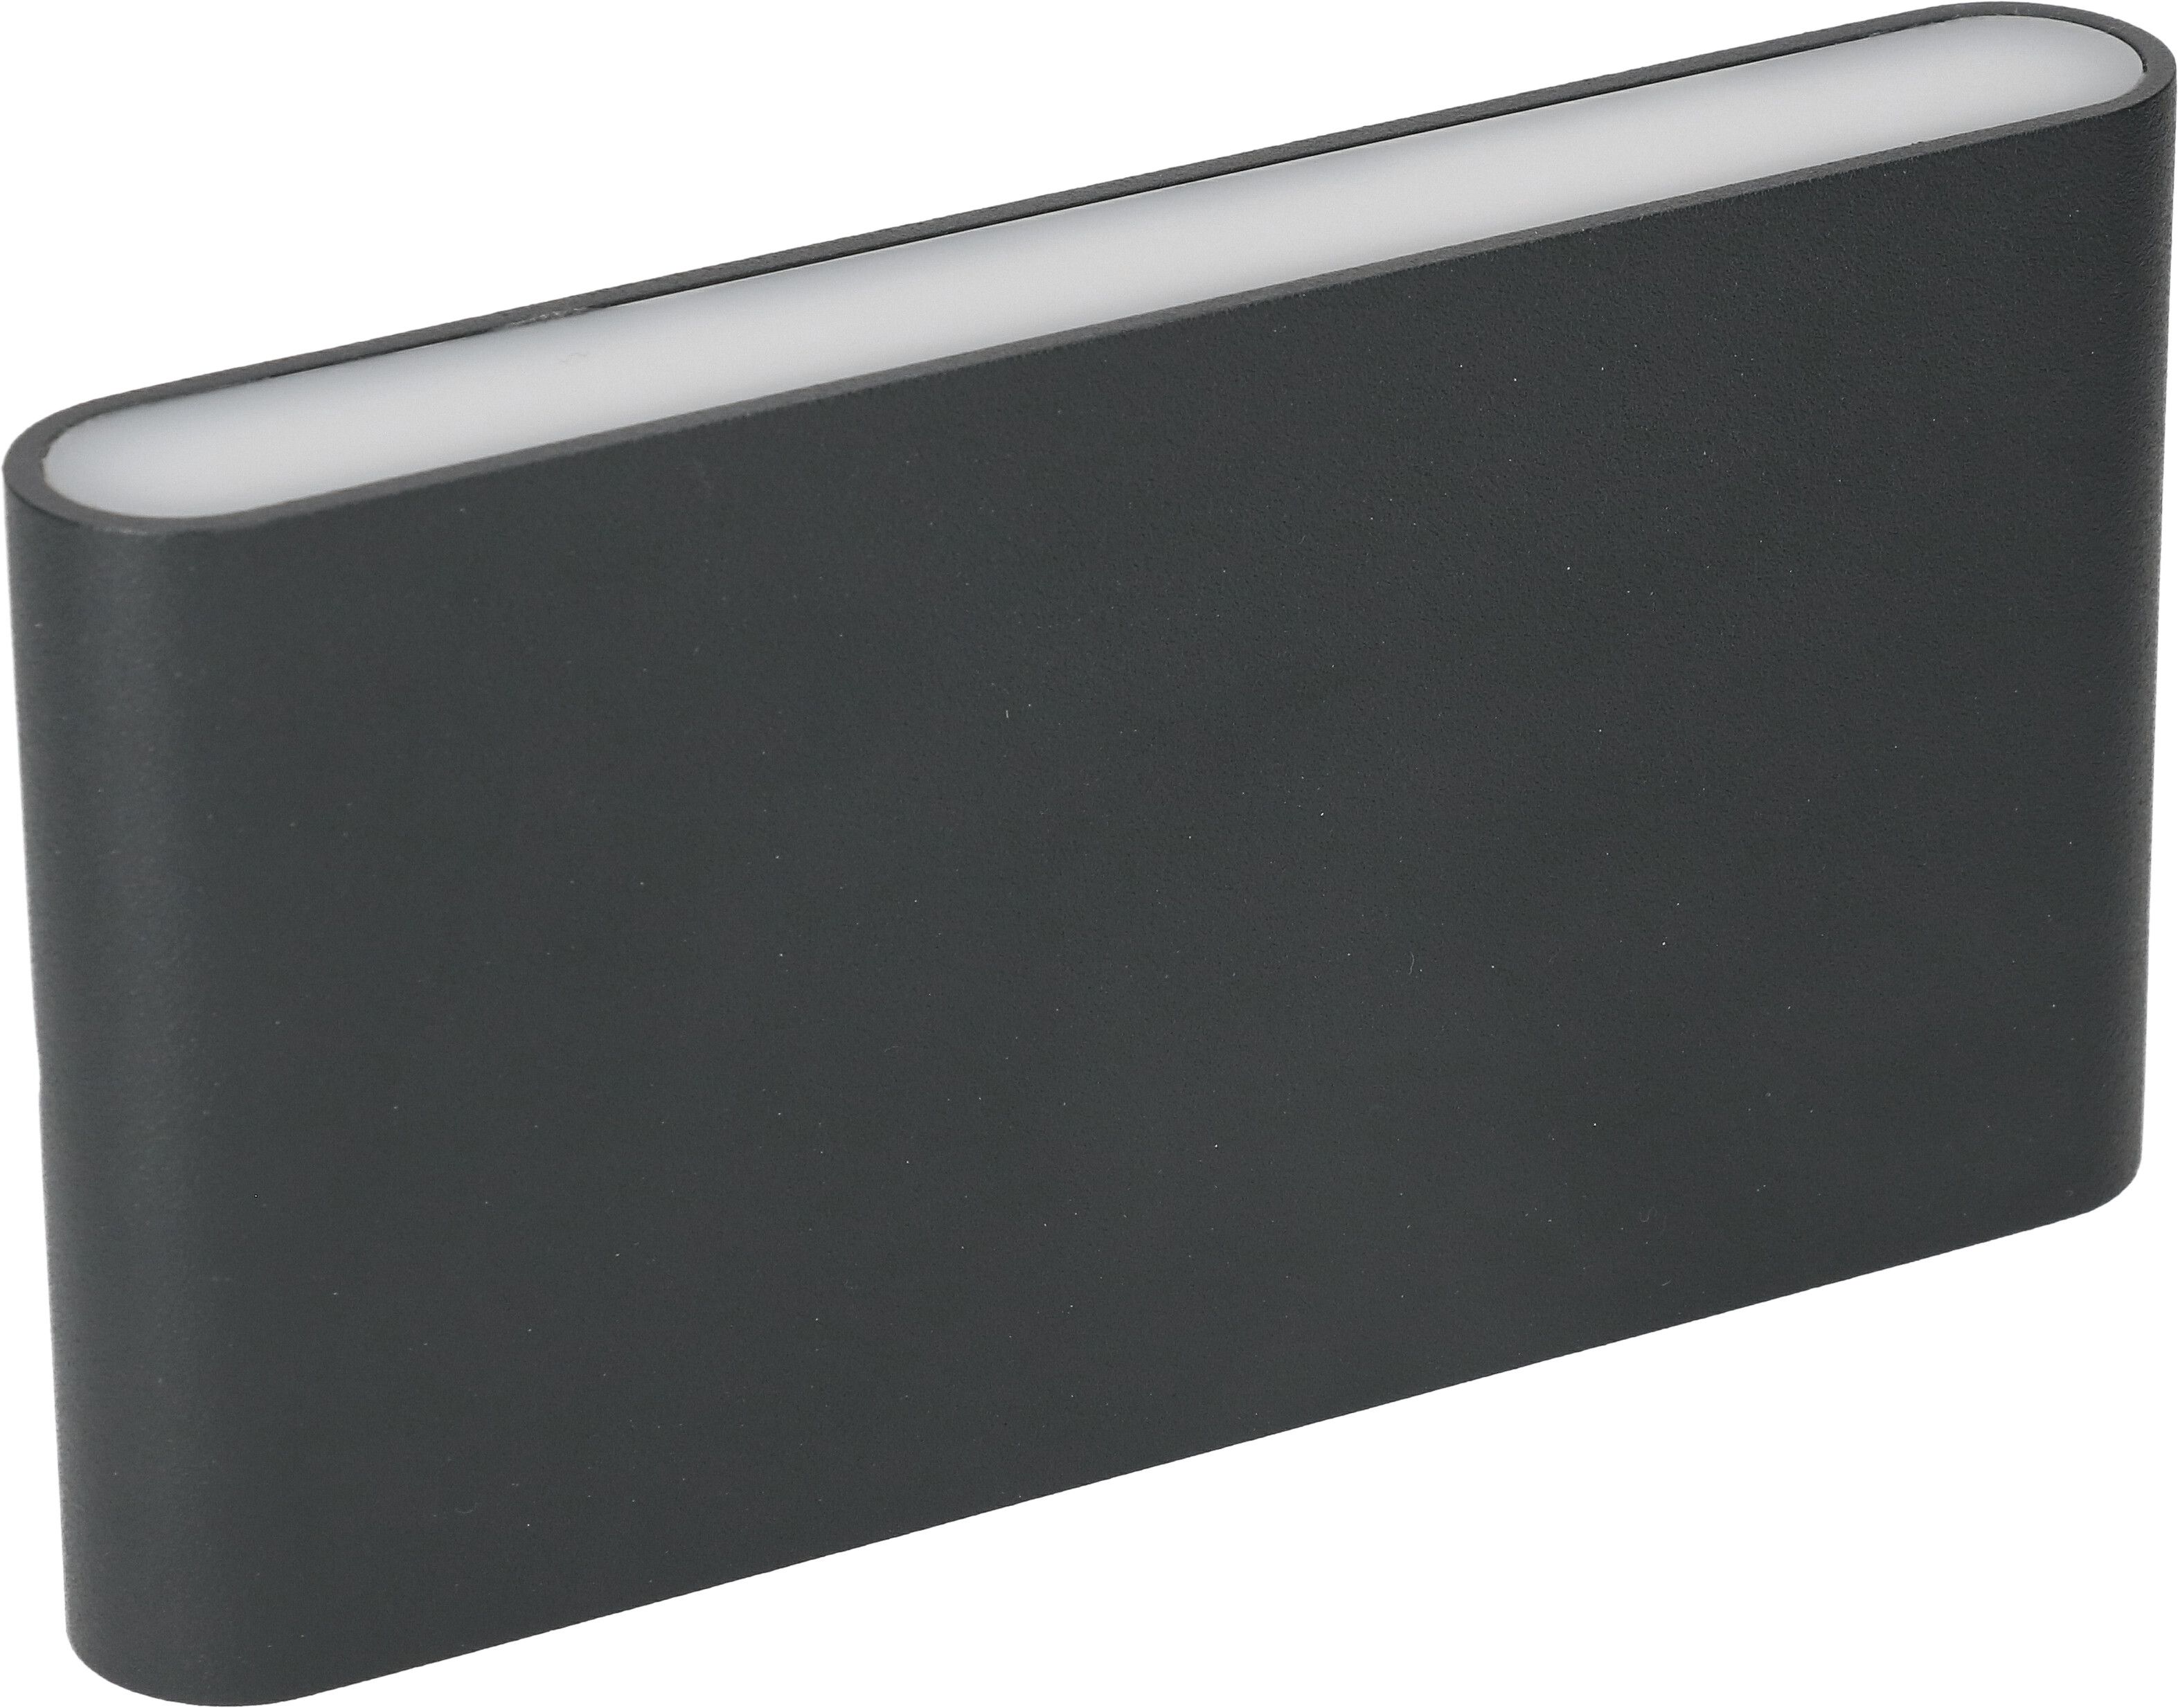 applique murale à LED WALL-FLAT anthracite RAL7016